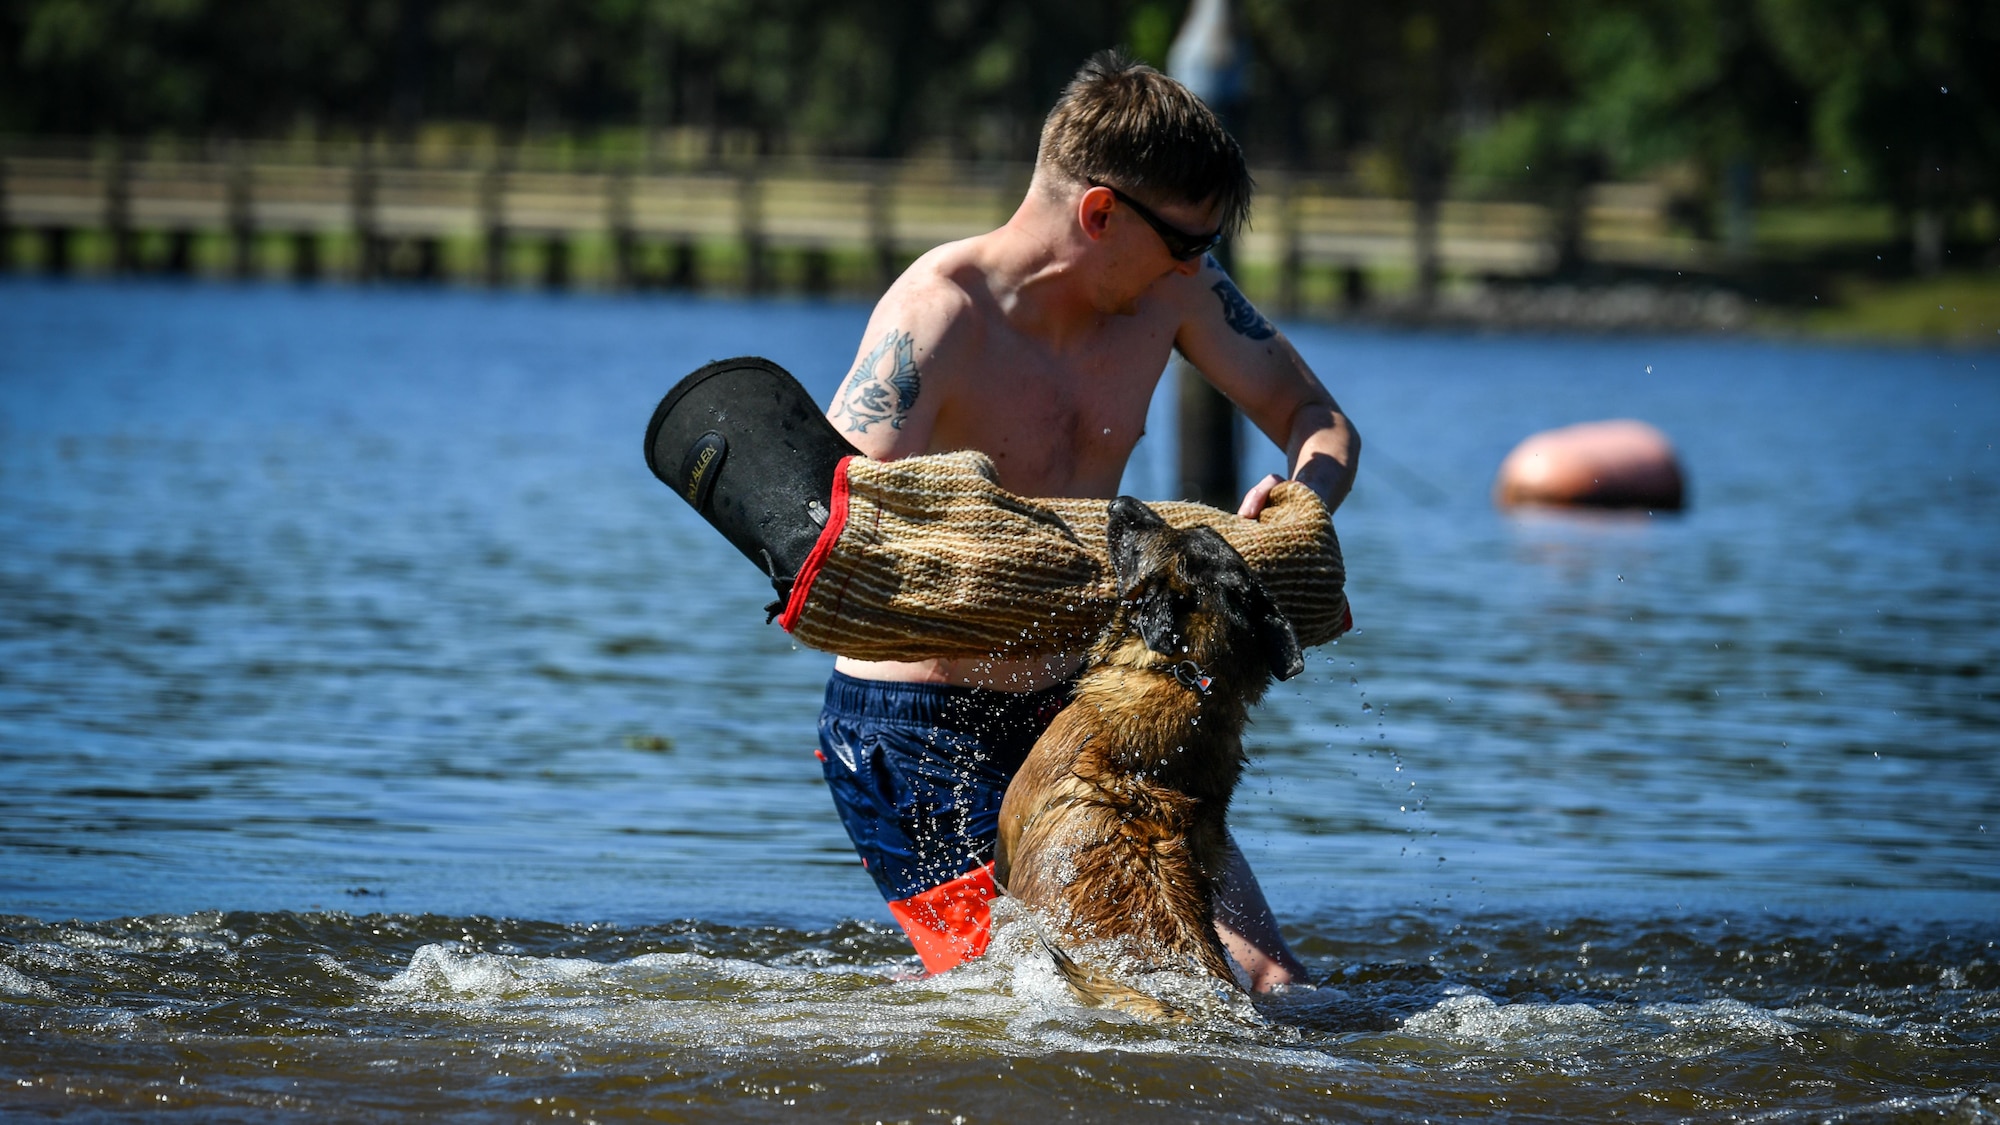 Senior Airman William Sims, 2nd Security Forces Squadron military working dog handler, attempts to evade MWD Zzeki during a water aggression training session at Black Bayou Lake in Benton, La., Sept. 6, 2017. MWDs performed bite drills designed to slow down or stop suspects attempting to flee apprehension by escaping into a body of water